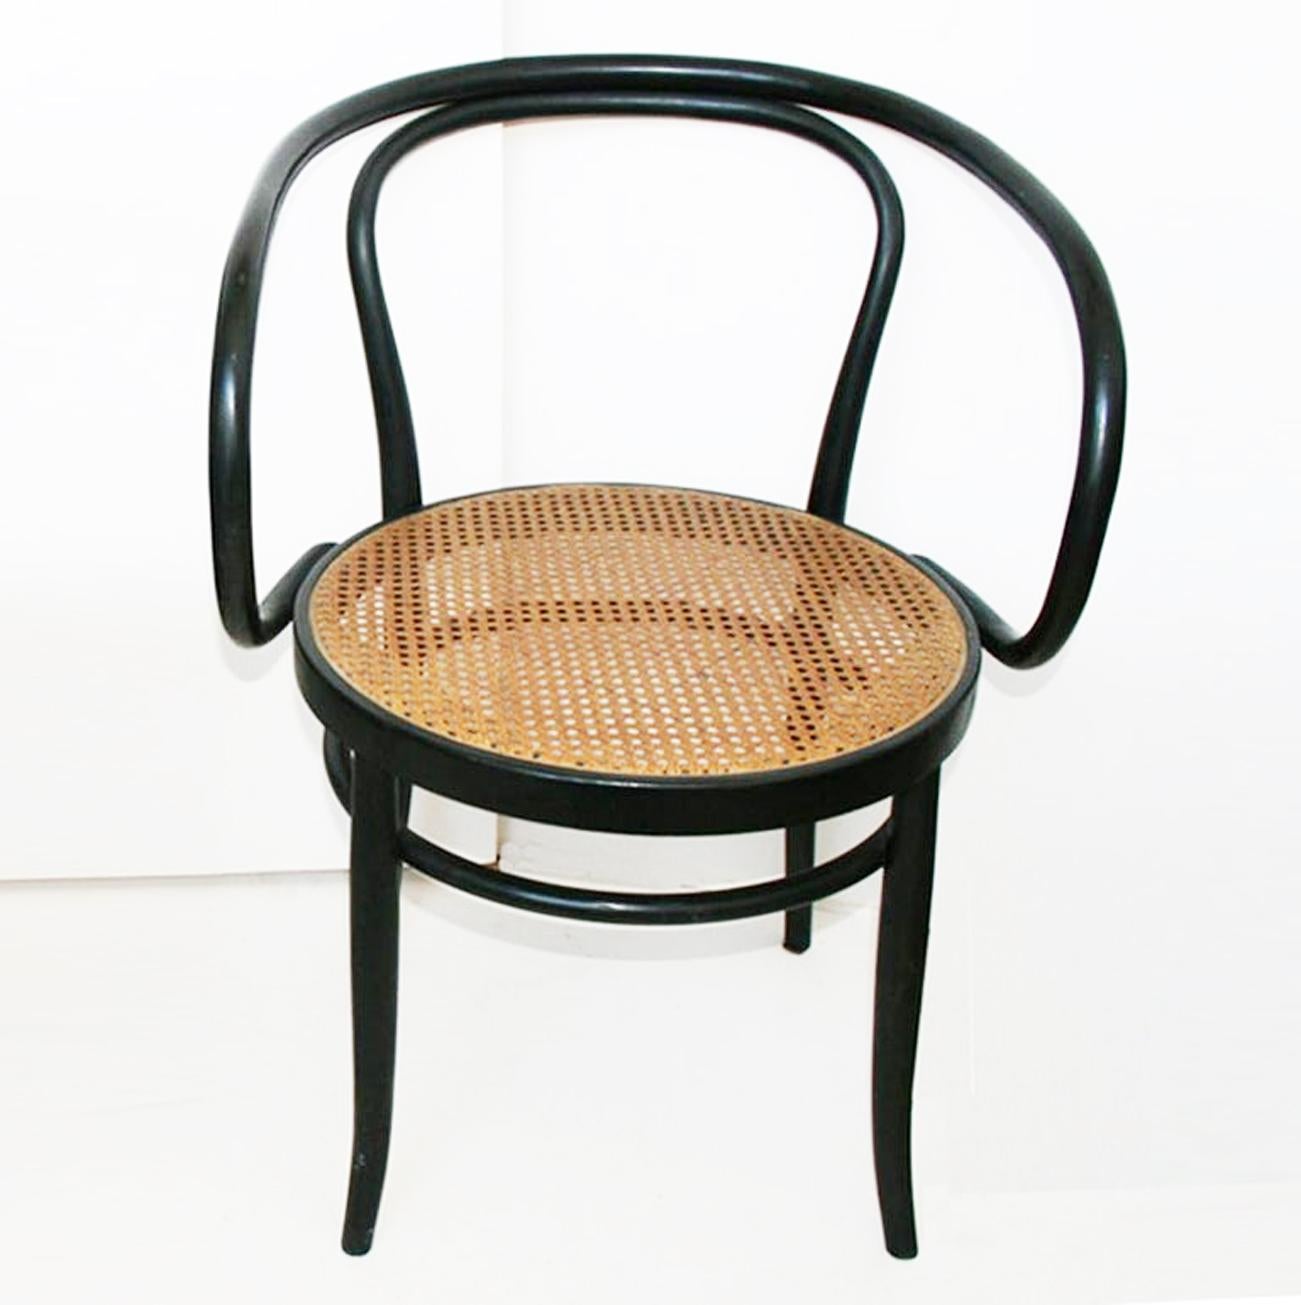 Czech Midcentury Chair After Thonet 209, Black  Bentwood , 1950s